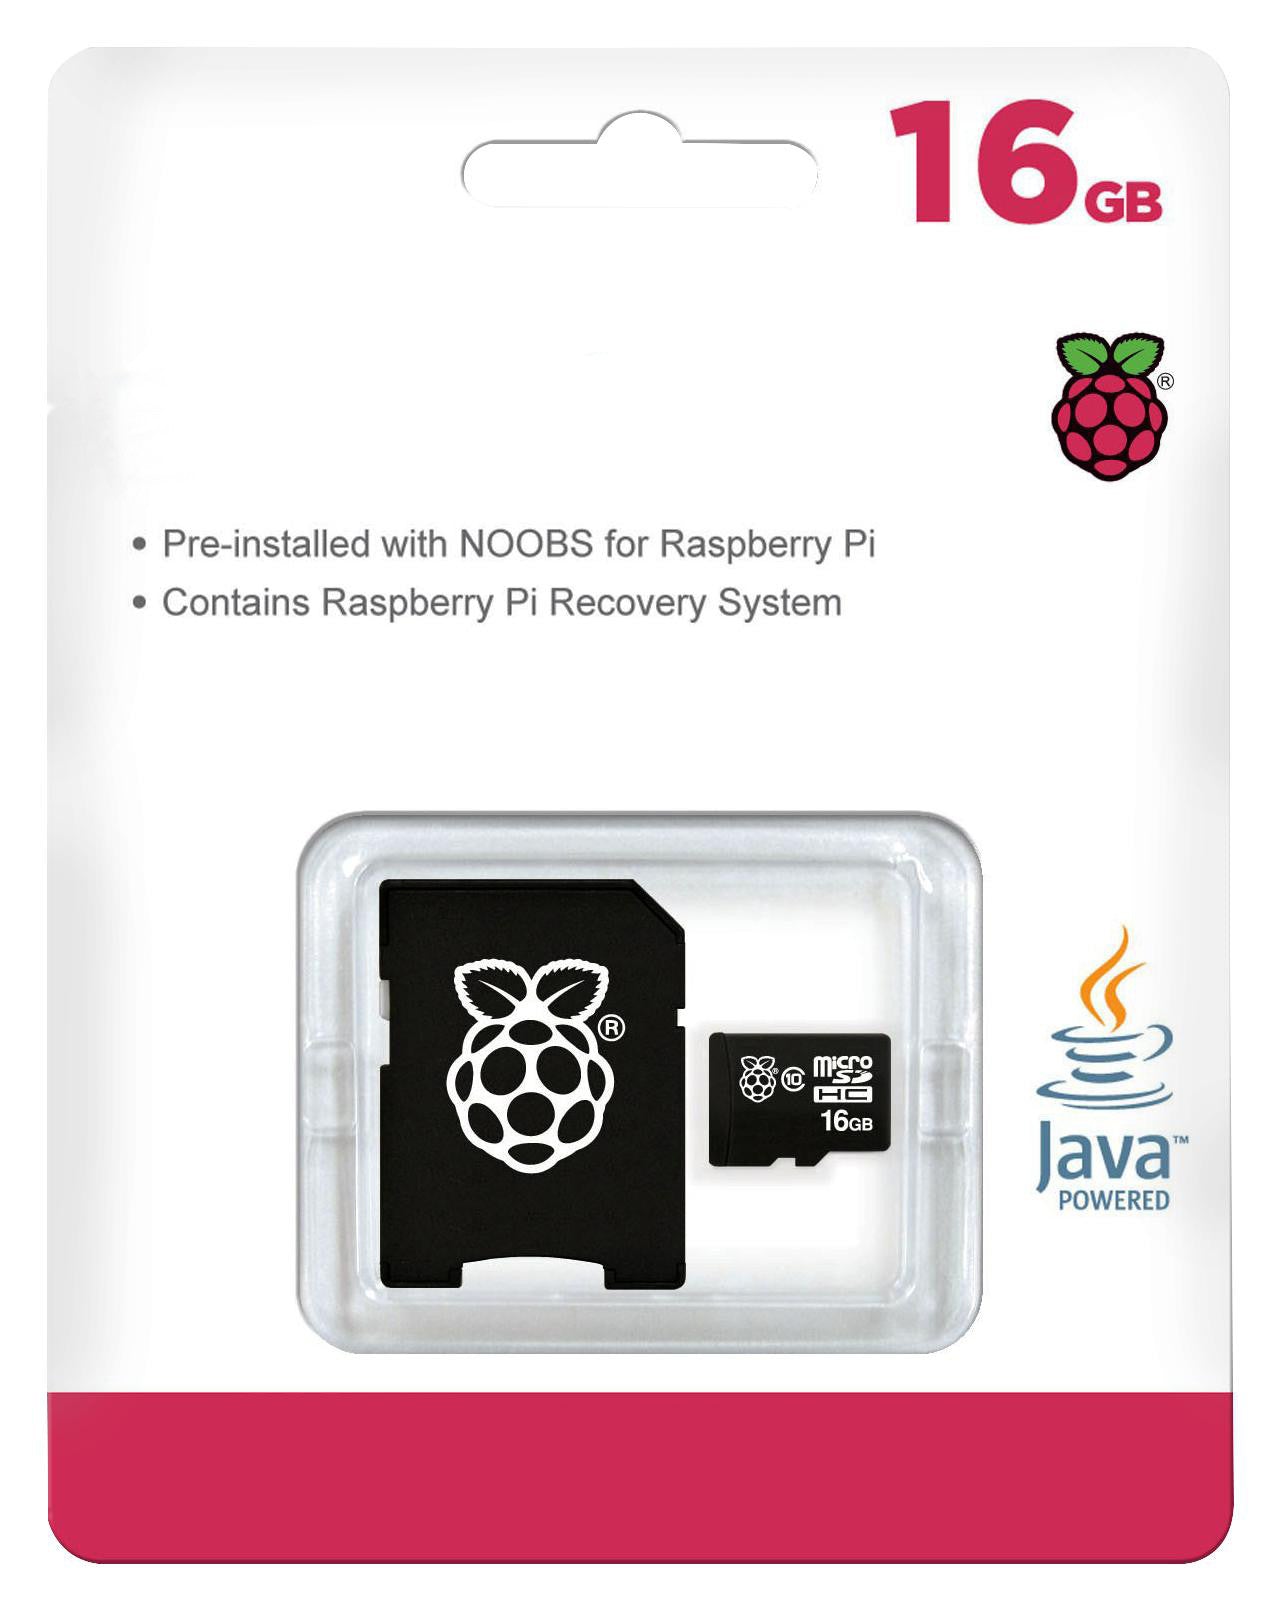 Raspberry 16GB Micro Sd Pre-installed NOOBS for Raspberry Pi Software - BNR Industrial